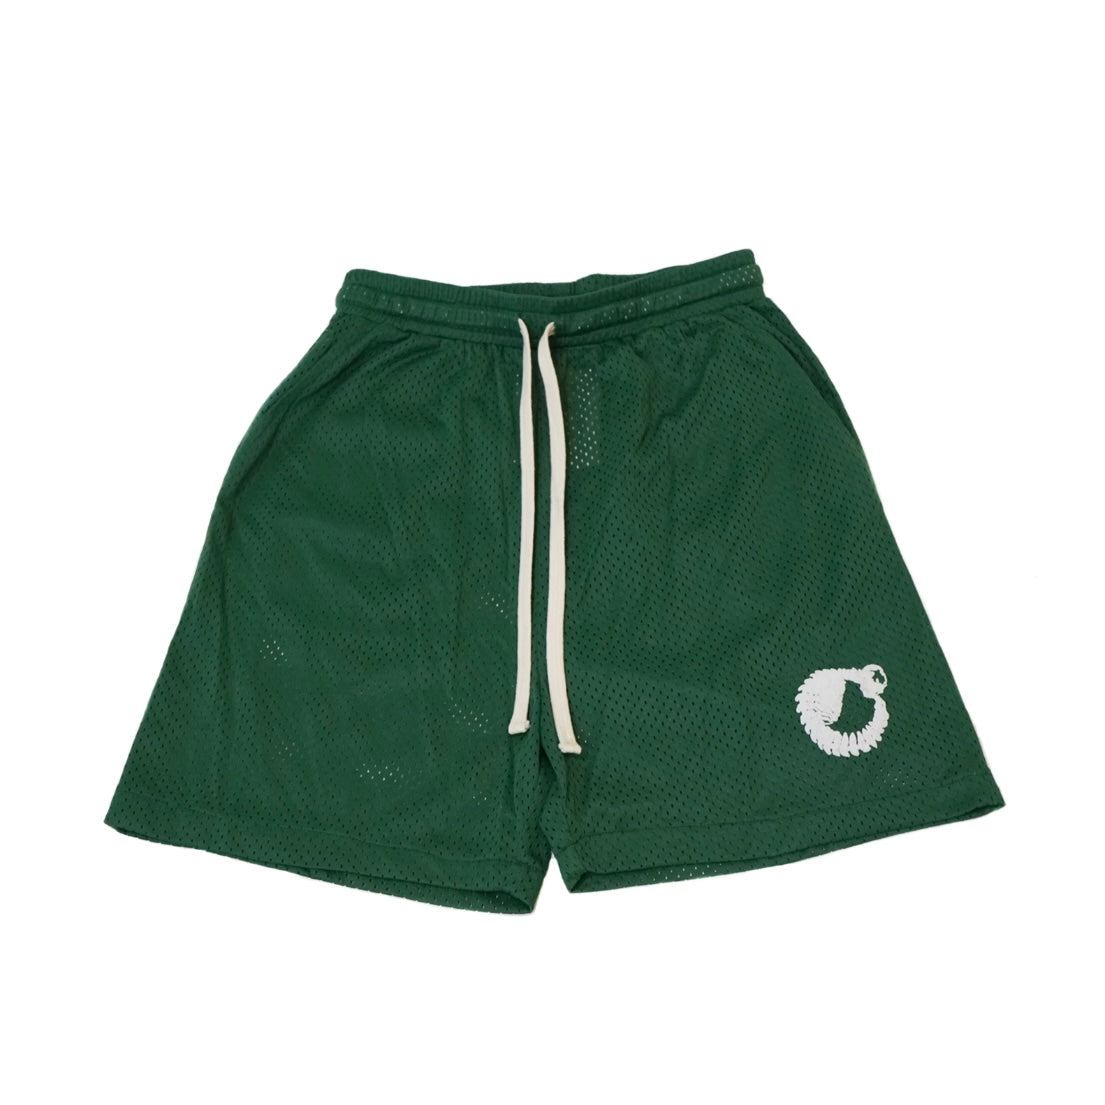 Everyday Shorts in Green Mesh